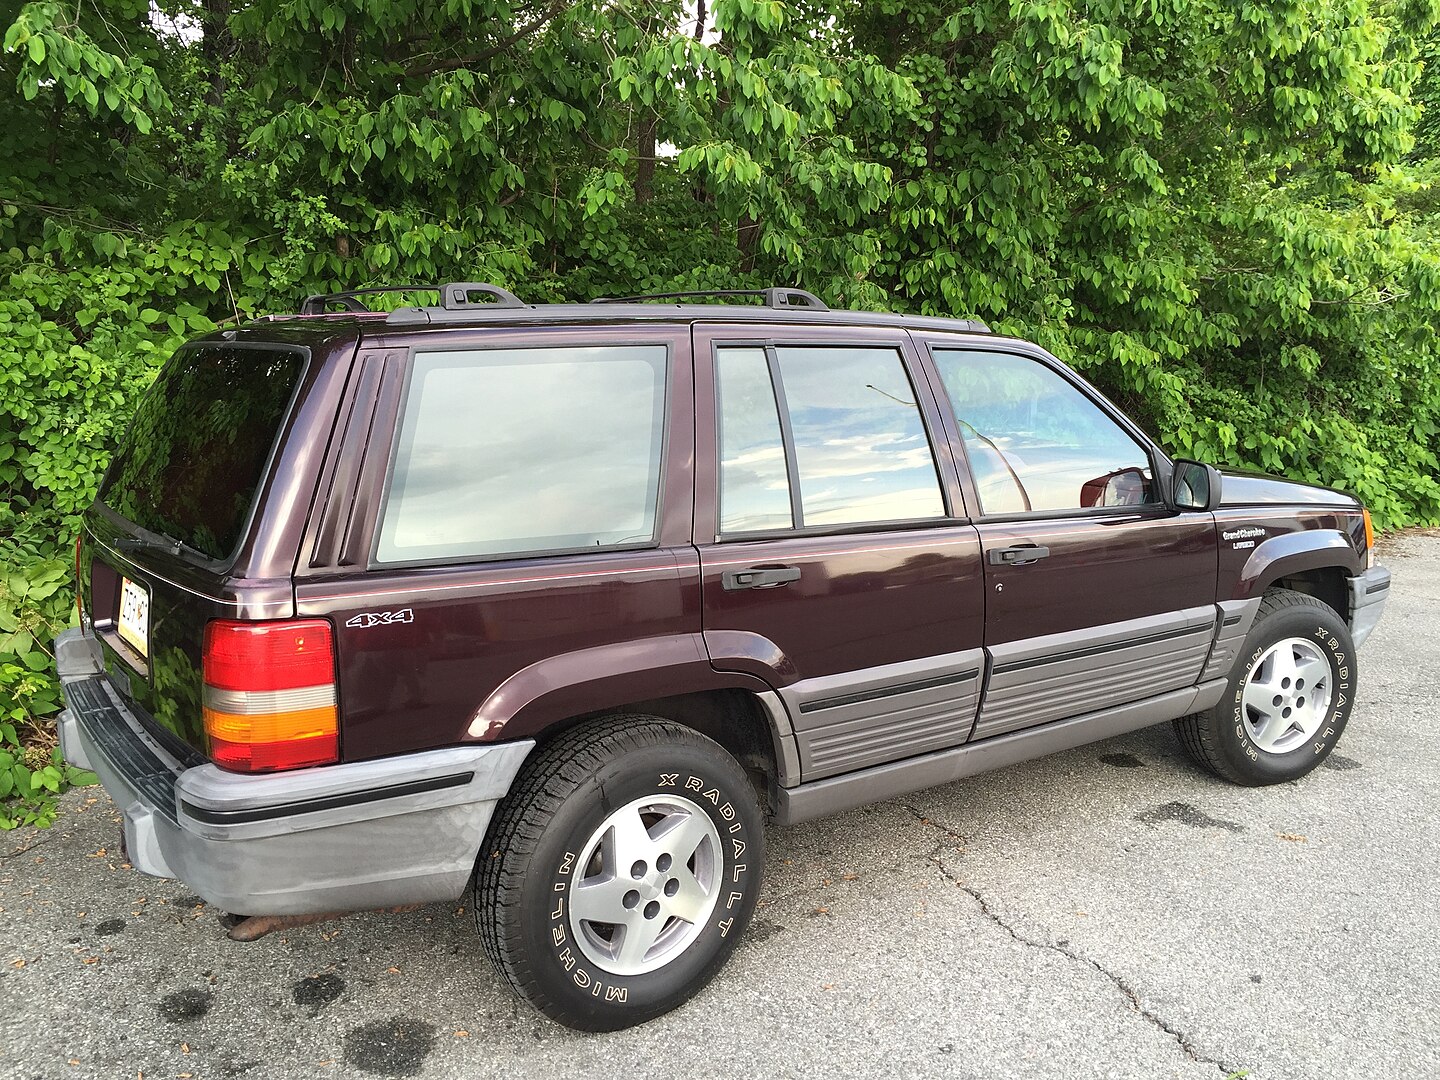 Example of a Grand Cherokee